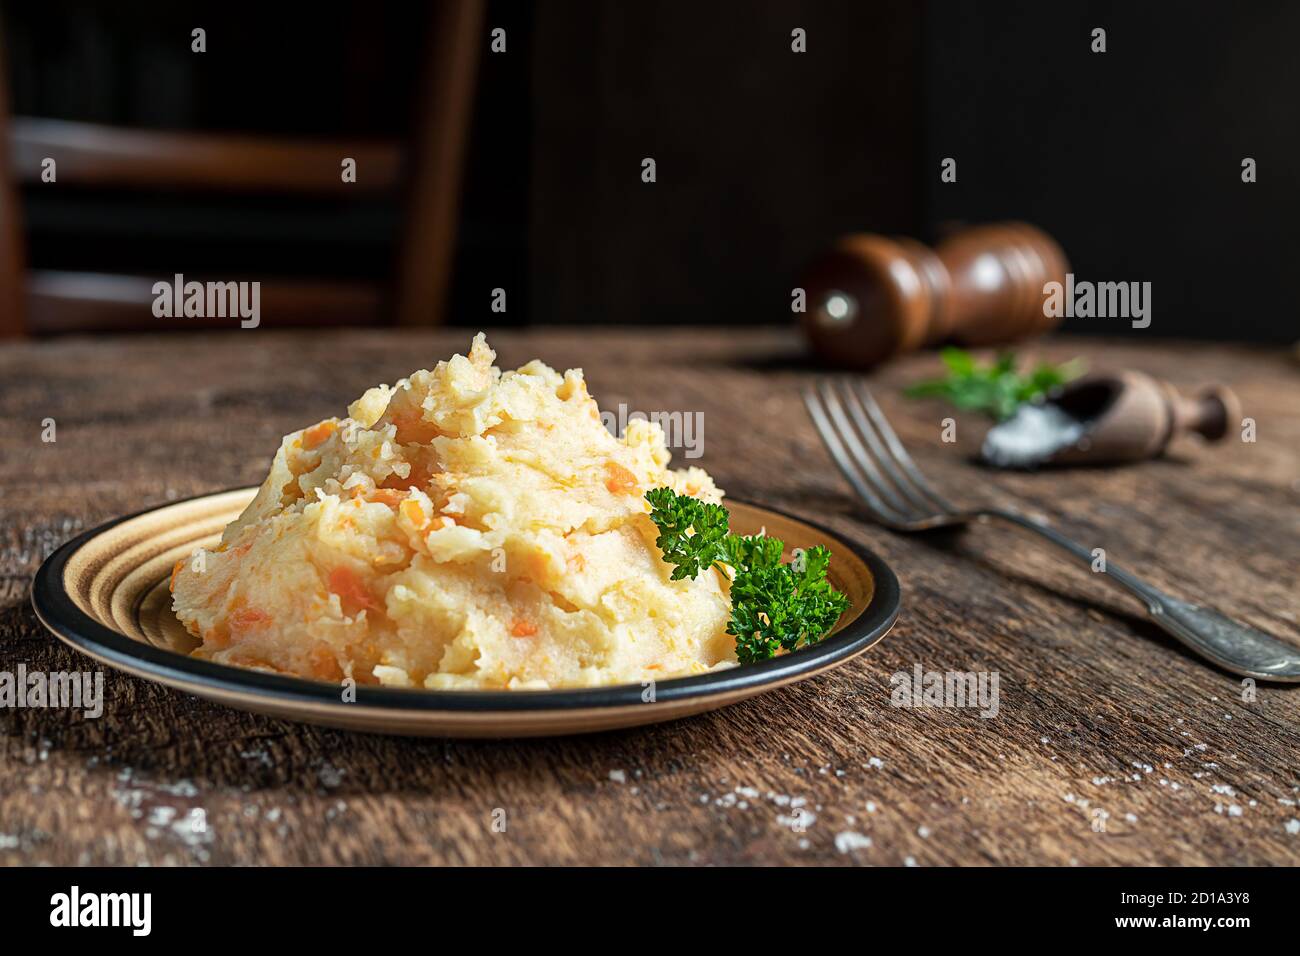 Mashed parsnips with potatoes and carrots on a dark wooden background close-up. Delicious and healthy vegetarian food rich in vitamins and minerals. Stock Photo